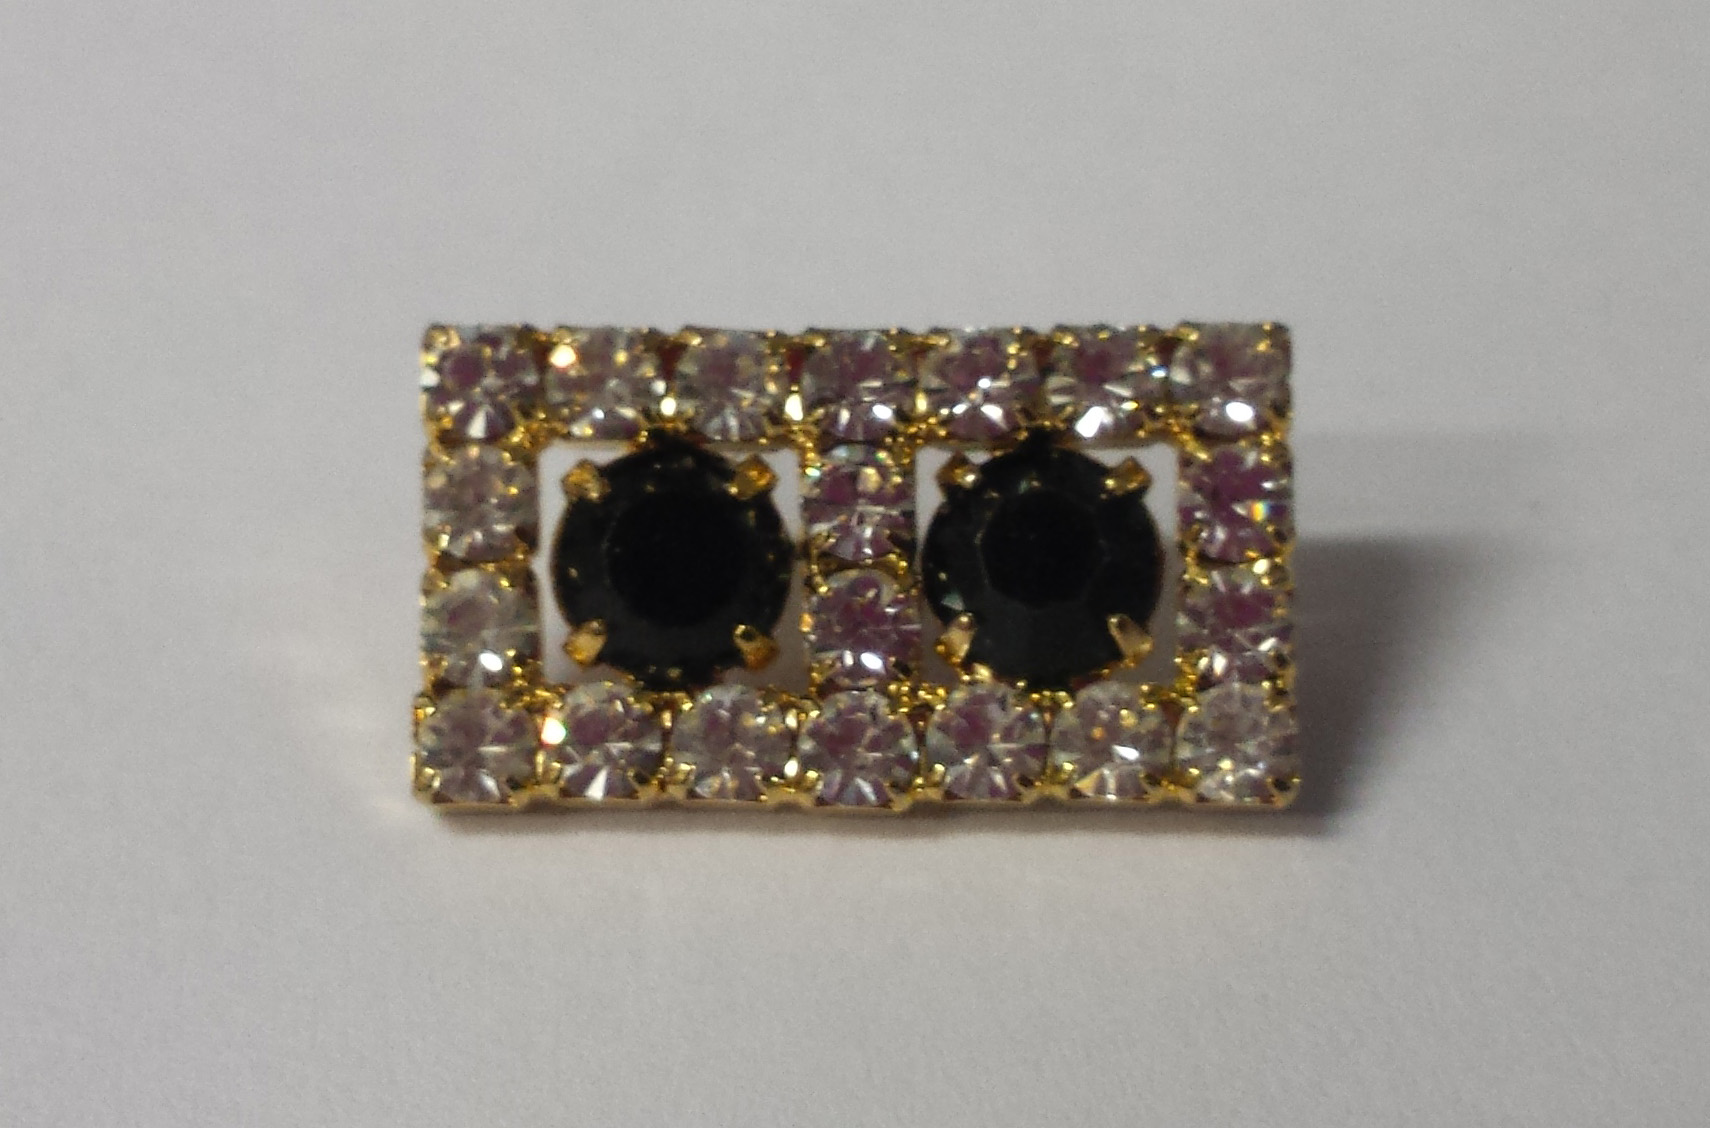 Dazzling Rectangular Rhinestone Button Crystal and Black with Gold Backs - 1 1/4 inch by 5/8 inch #Daz0011